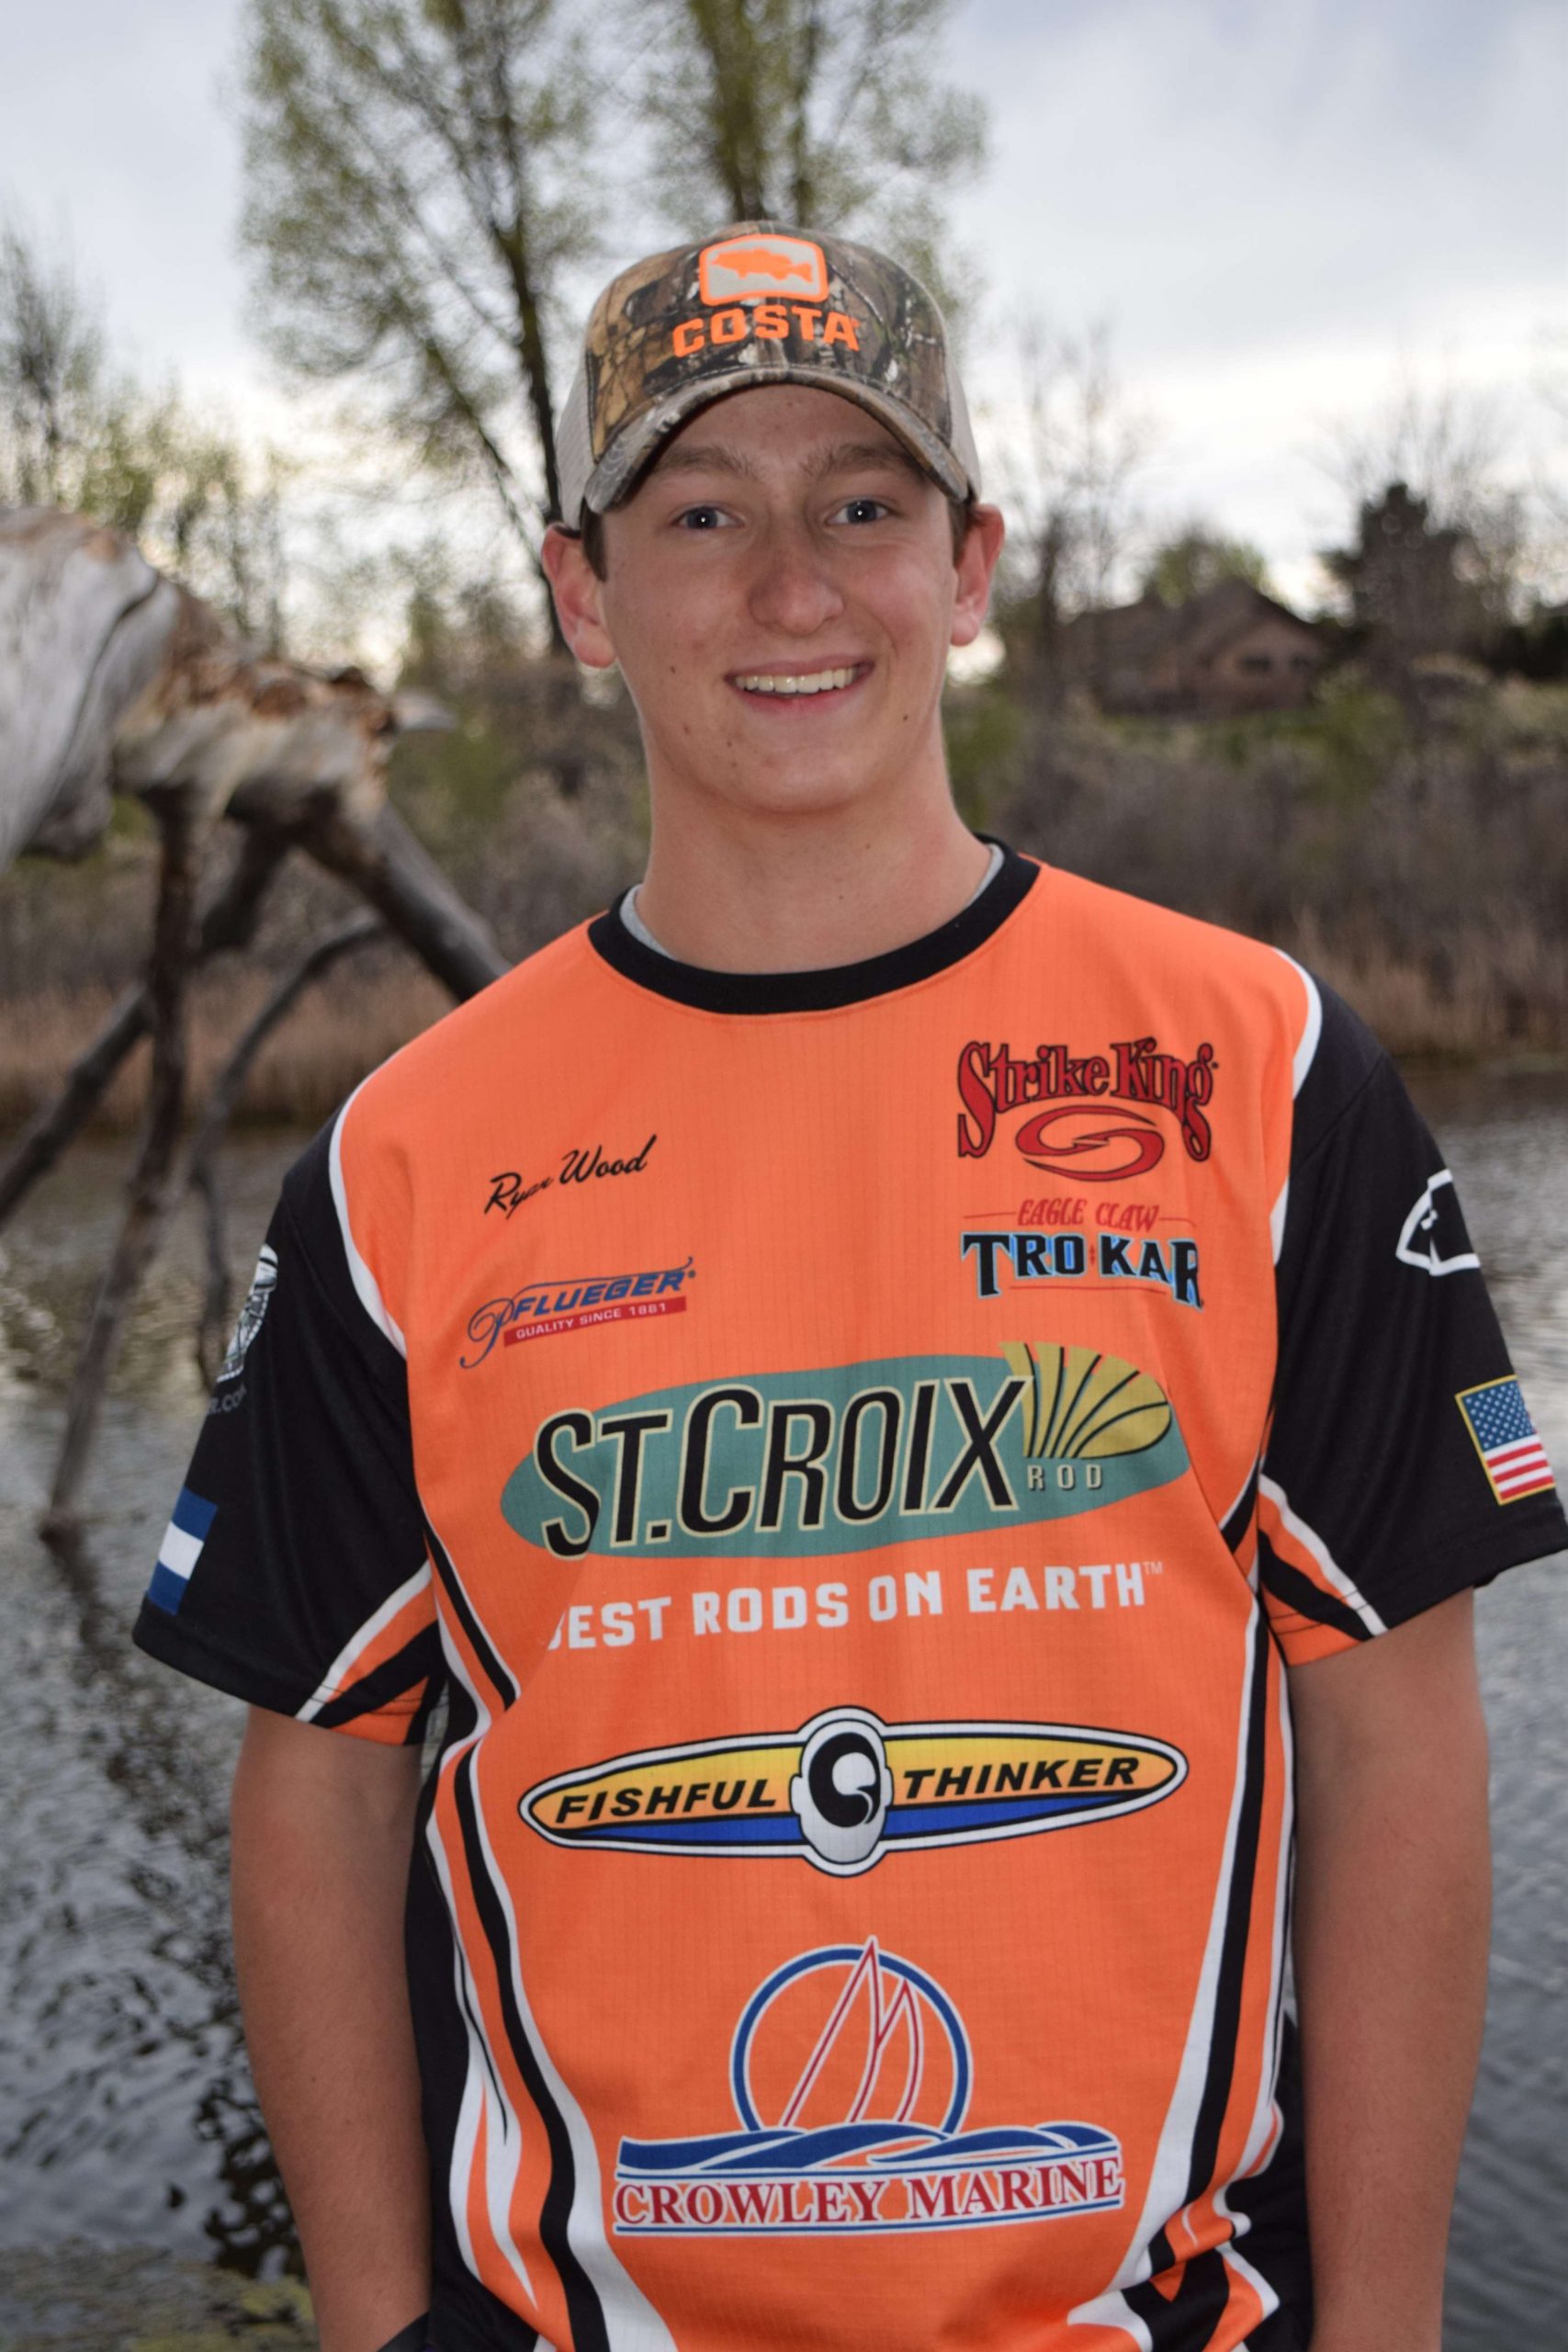 <p><strong>Ryan Wood, Colorado</strong></p>
<p>A senior at Legacy High School, Wood currently has a 4.0 grade average and is a member of the National Honor Society. Just last year, he won the prestigious Costa Bright Future Scholarship, which was presented at the 2014 Costa Bassmaster High School National Championship.</p>
<p>Wood has been successful at multiple levels of competition from Junior Bassmaster to high school tournaments and adult events. He won the 2013 Bassmaster Junior World Championship on the Arkansas River, finished in the Top 20 in the 2014 Costa Bassmaster High School National Championship, then he went on to win a Denver Bassmasters adult open at Horsetooth Reservoir. He was a charter member of his club, Front Range Bass Club, and presently serves as its president.</p>
<p>Wood has been a leader in conservation, helping his club earn a conservation grant to refurbish and add structure to a pond in North Denver and volunteering with the Colorado Parks and Wildlife to assess the aquatic health of lakes, ponds and streams in his state. He also has led seminars for children on fishing, as well as catch and release. Wood has participated in church mission trips, volunteered at kidsâ derbies and organized backpacks and school supplies for a charity in his hometown.</p>
<p>Read his full profile <a href=